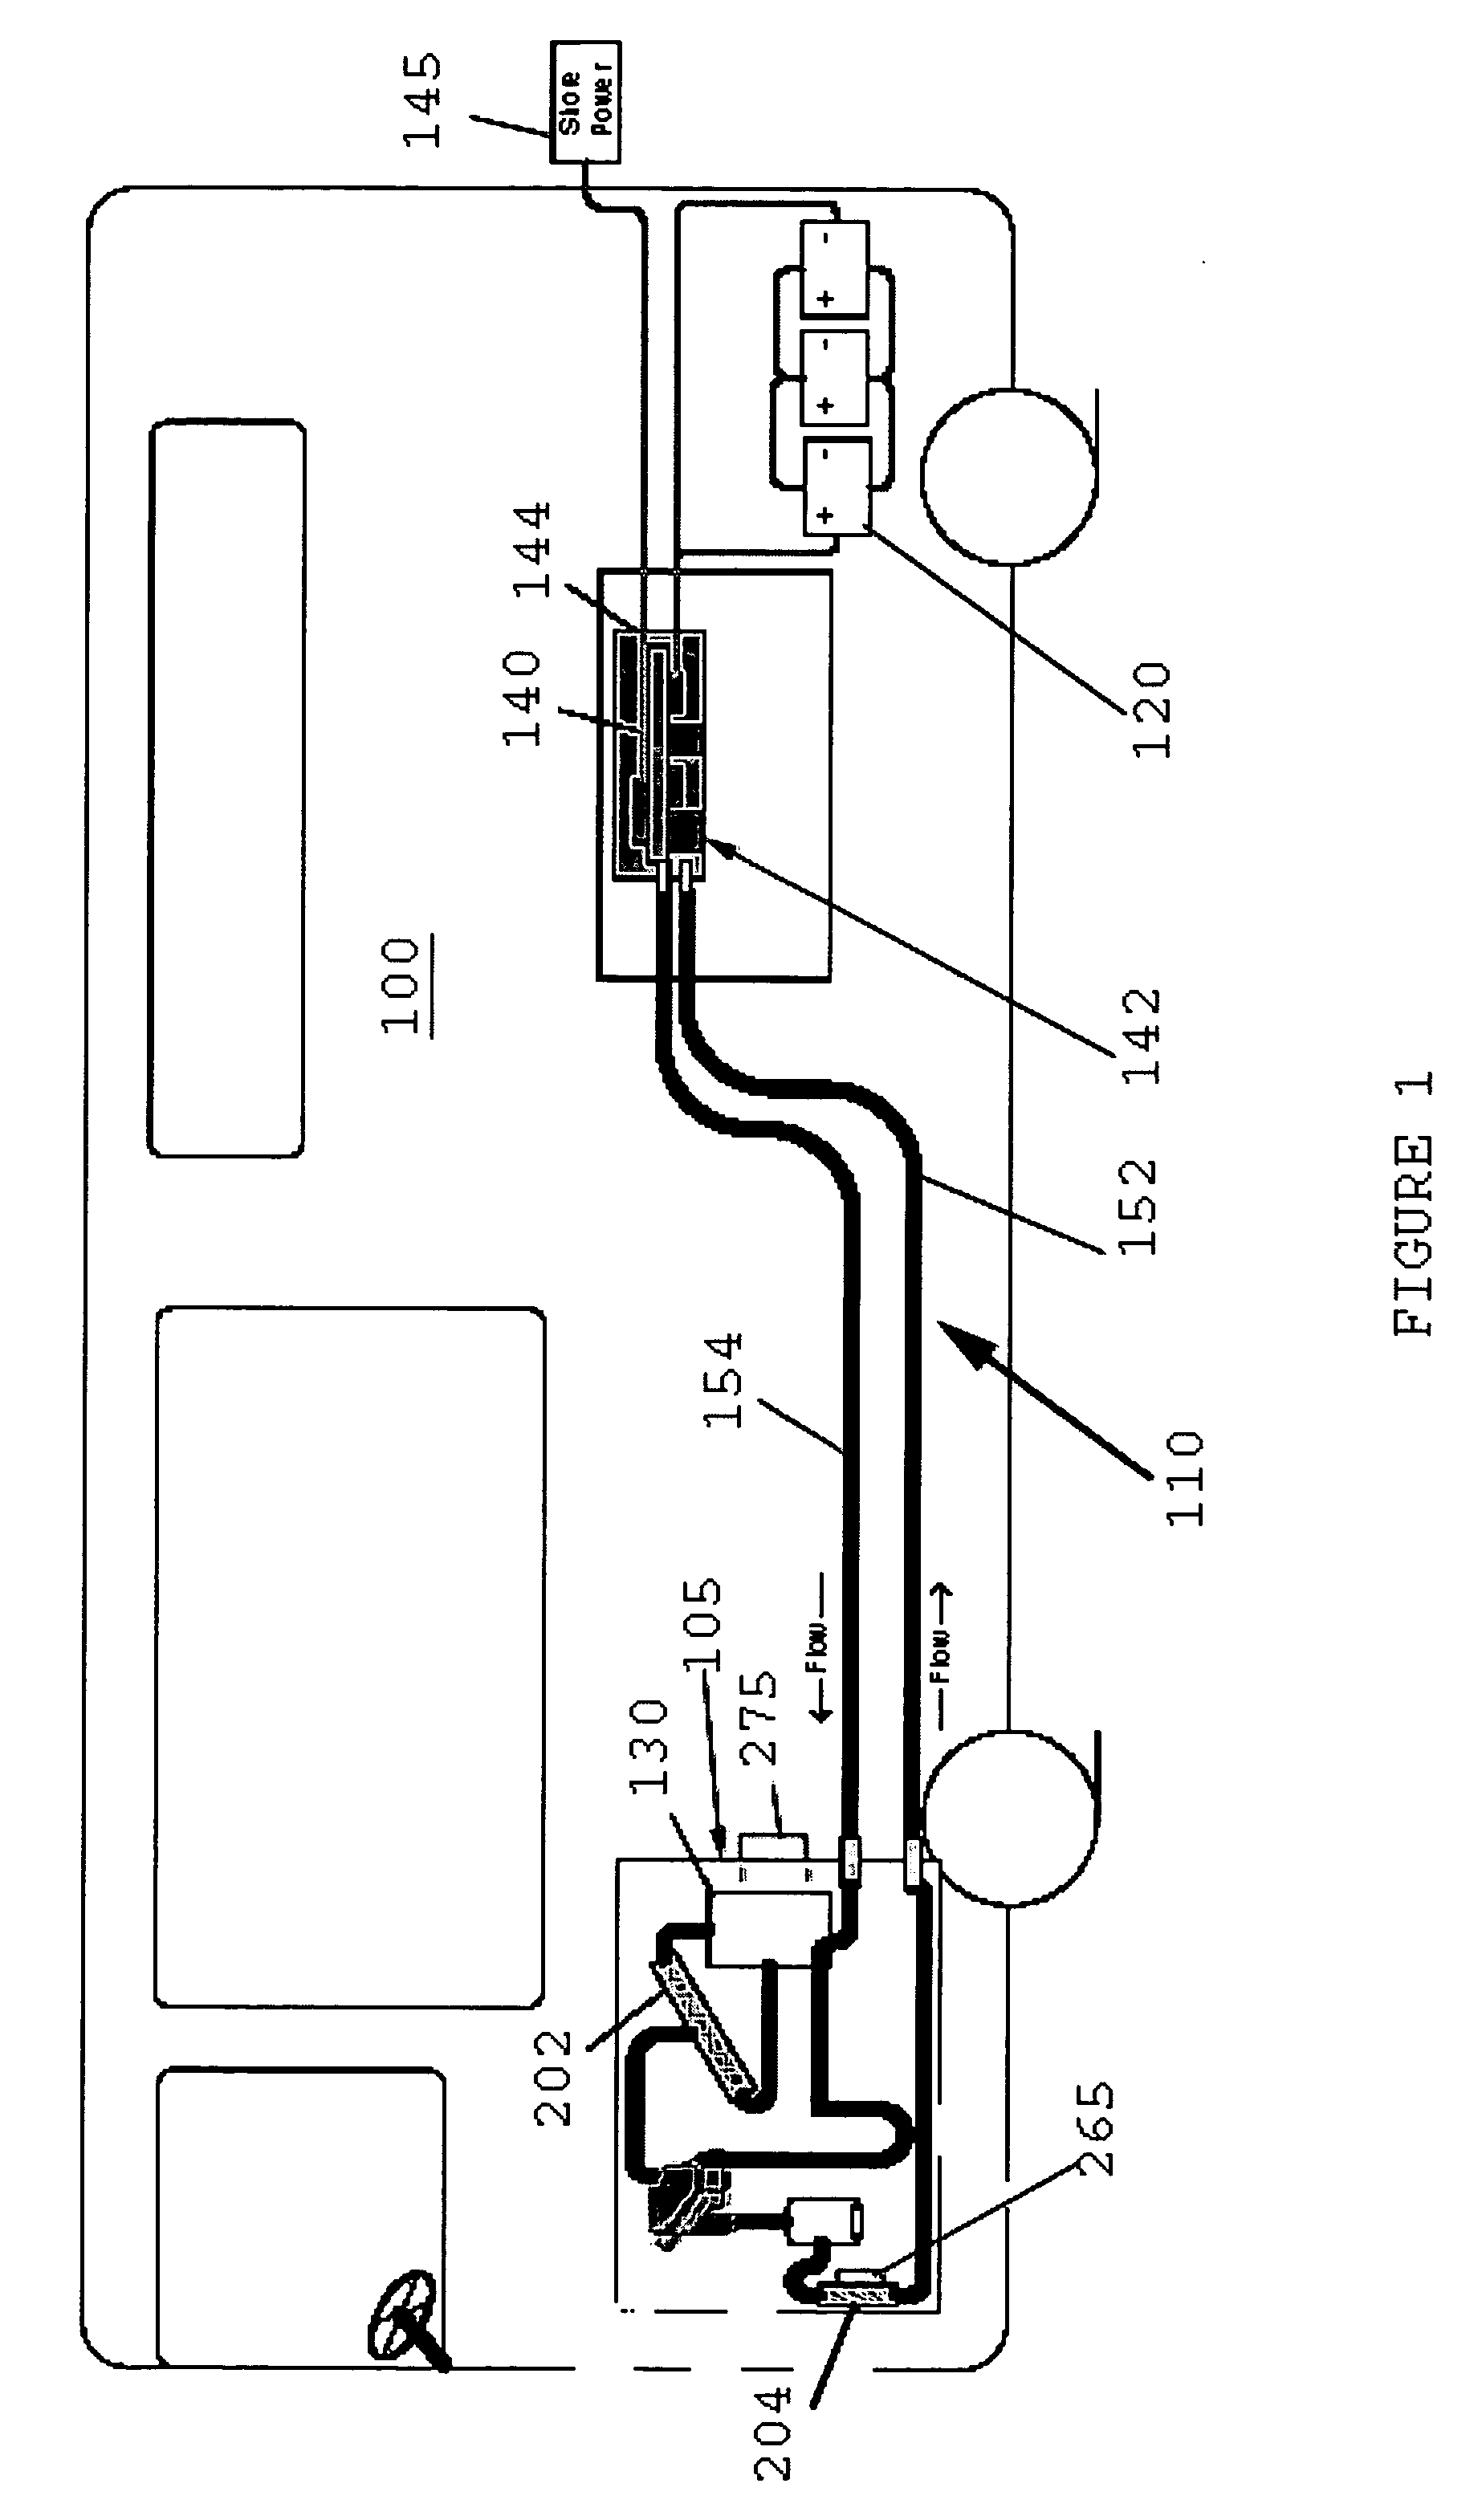 Cooling system for hybrid power system